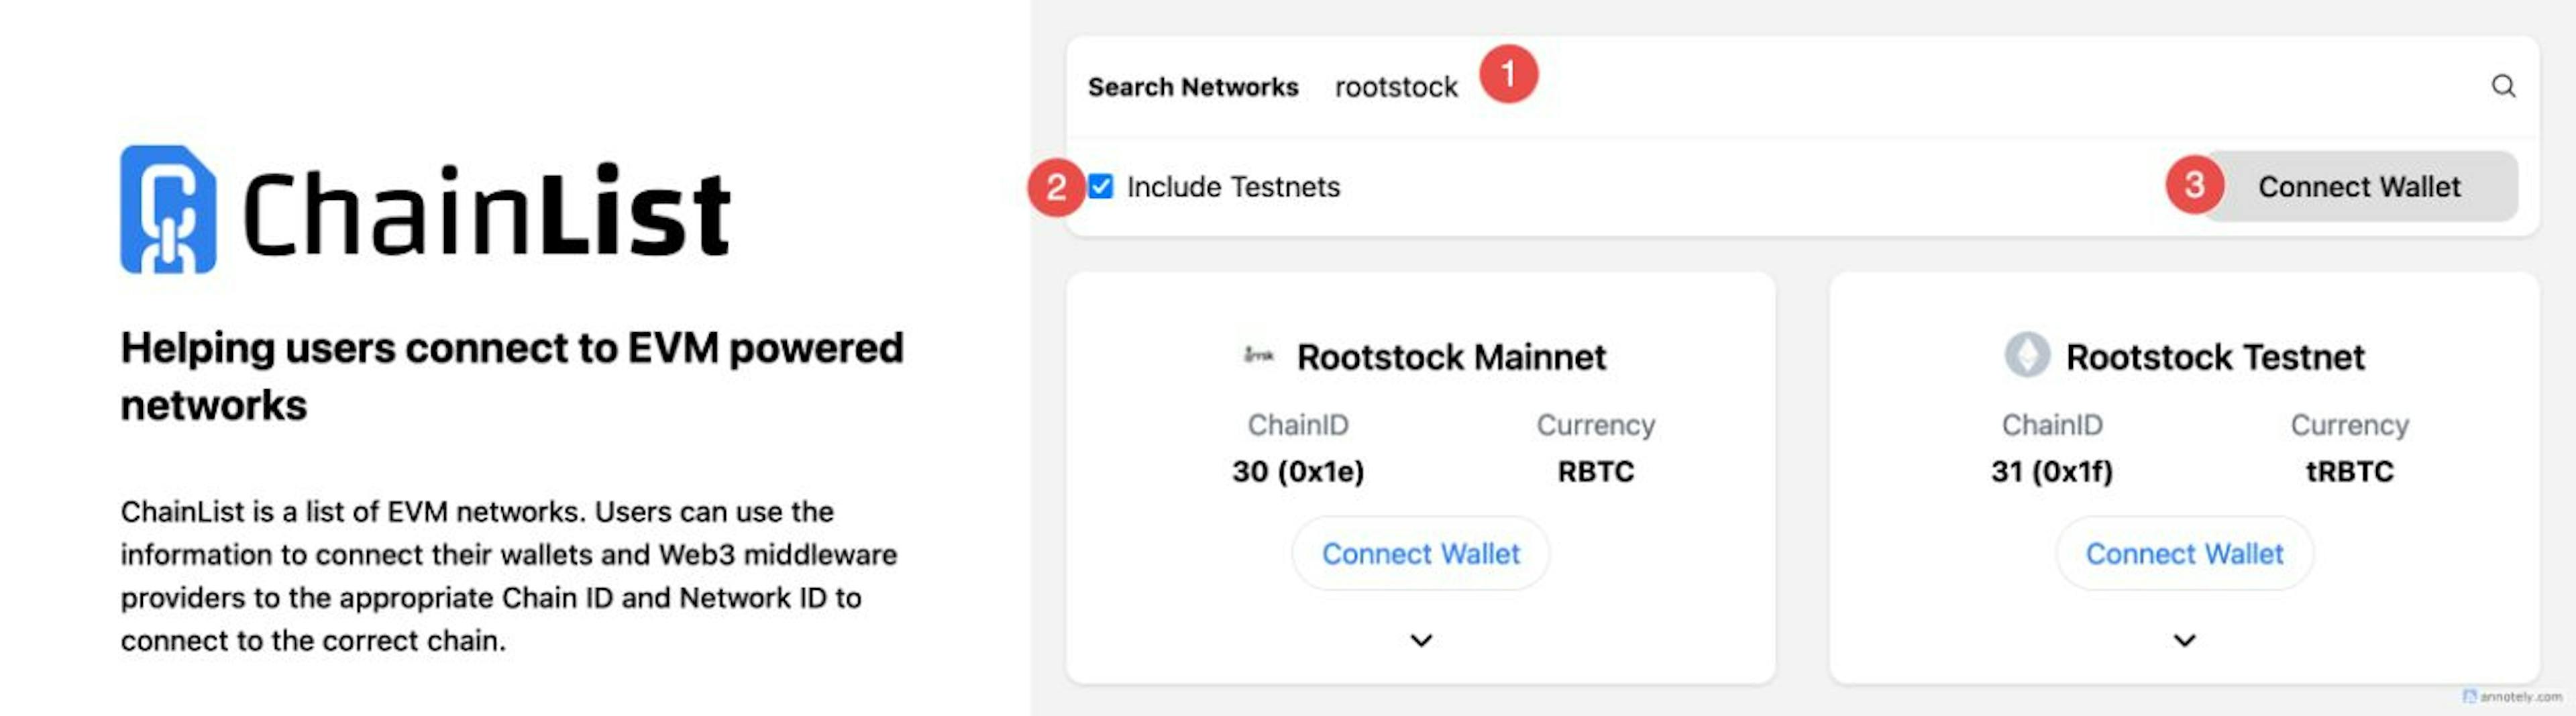 ChainList showing rootstock as search network with Testnets included